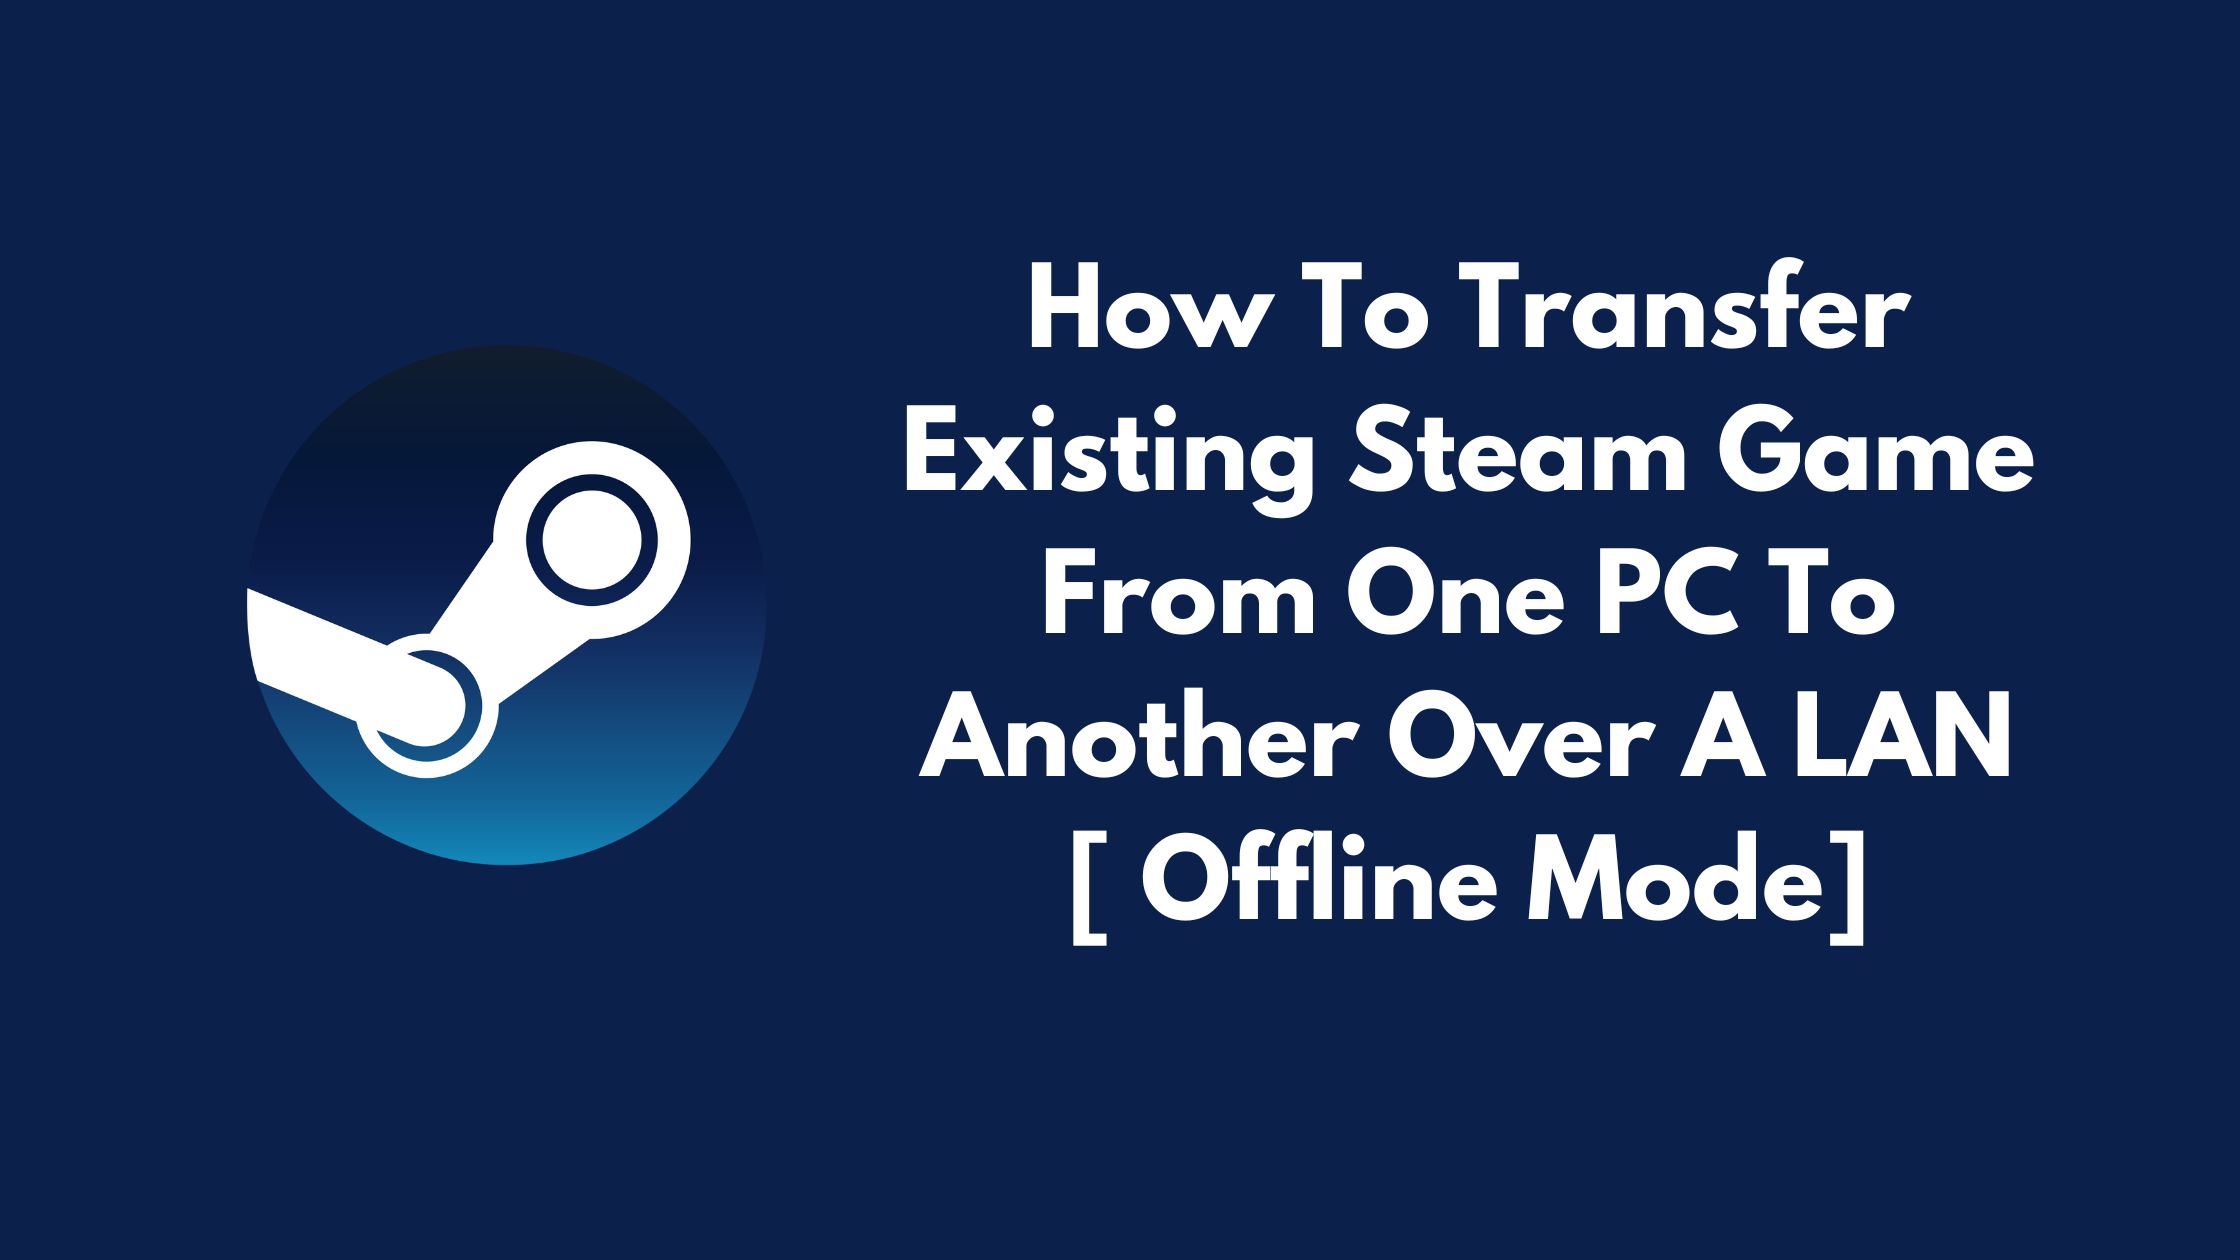 How To Transfer Existing Steam Game From One PC To Another Over A LAN